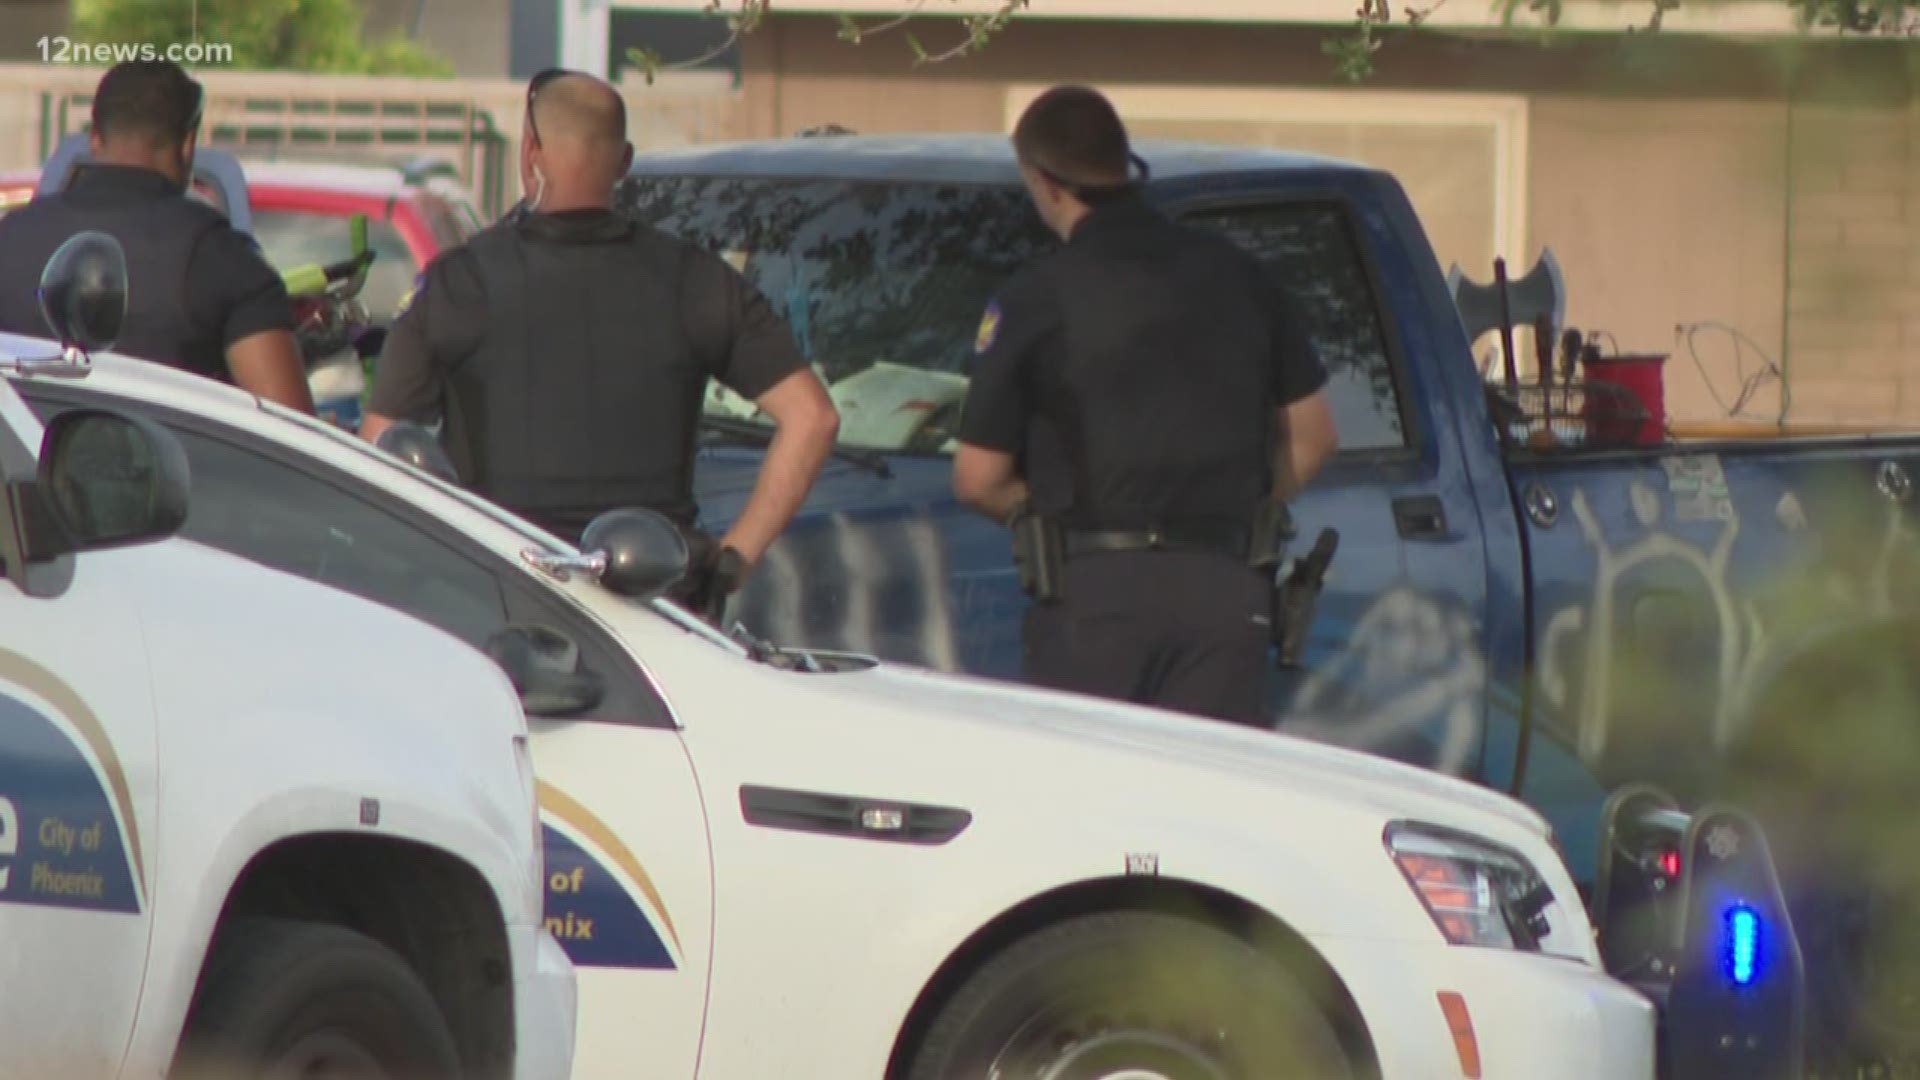 A man became unresponsive after being tased by police. The situation unfolded outside of Sunridge Park in Phoenix after officers say they received a call about a suspicious man.